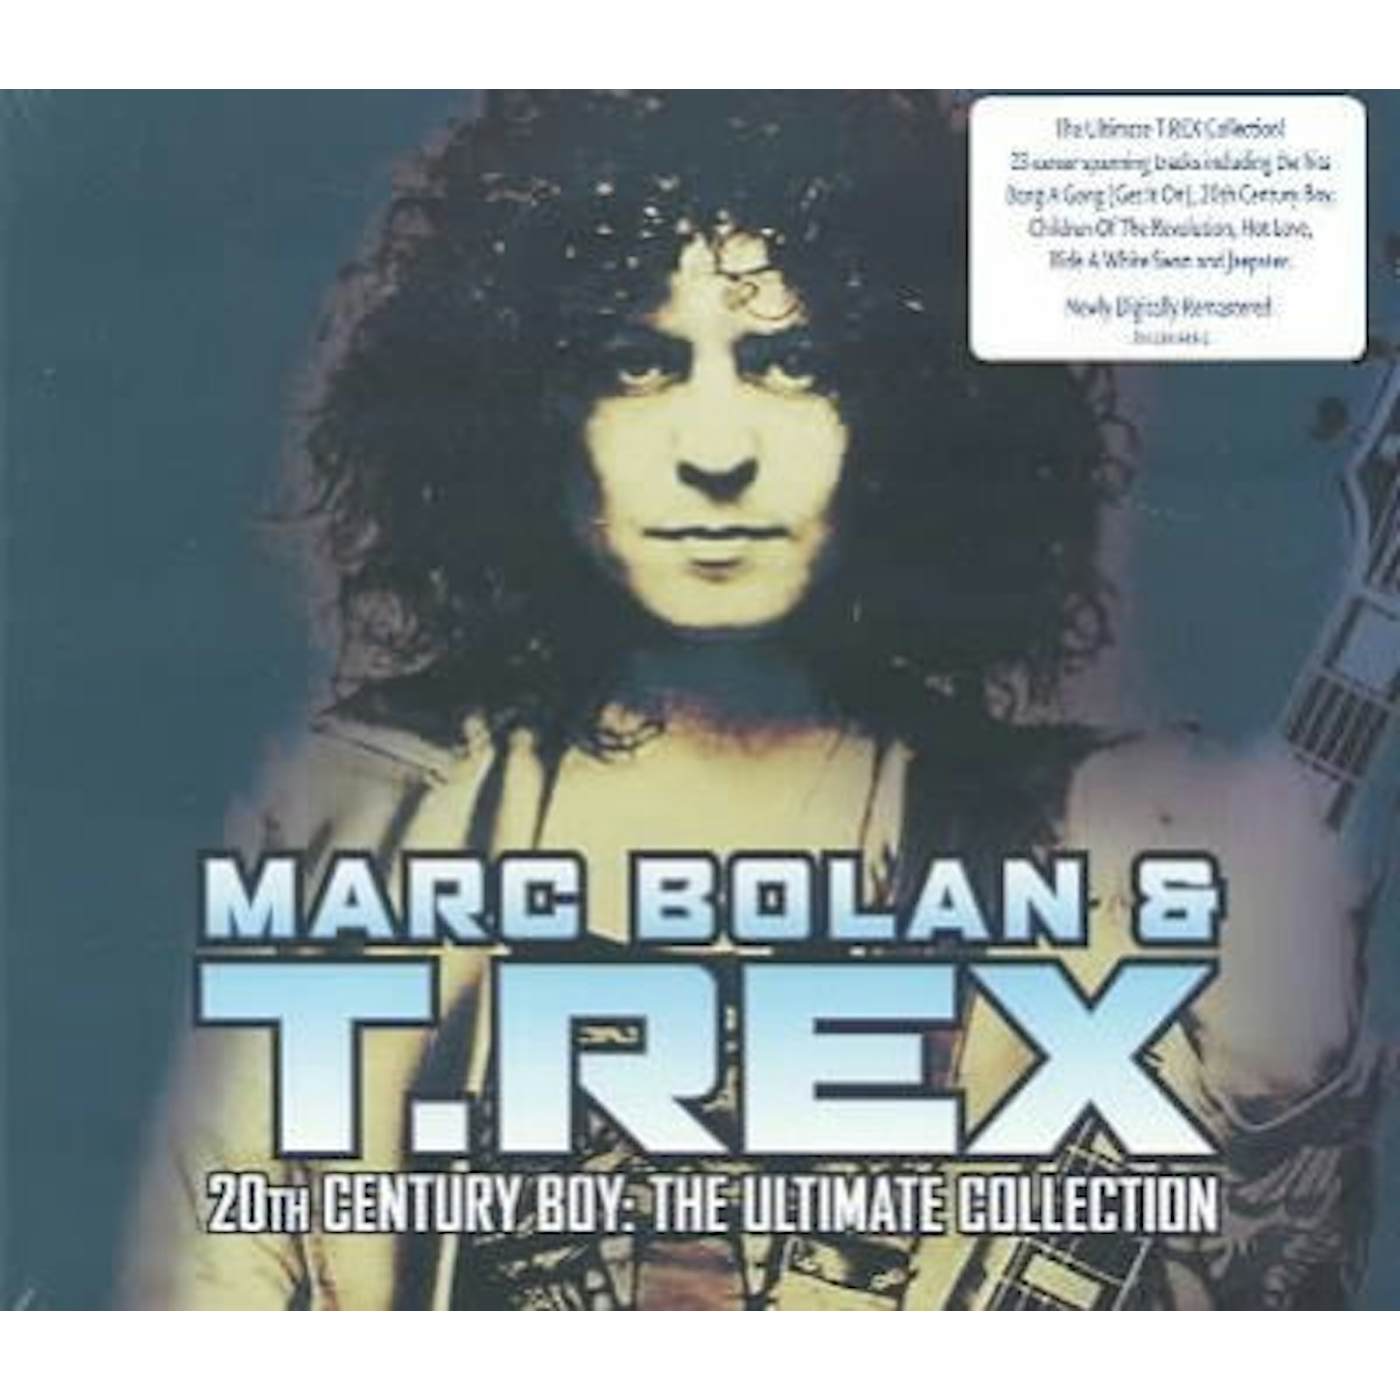 T. Rex 20TH CENTURY BOY: ULTIMATE COLLECTION CD